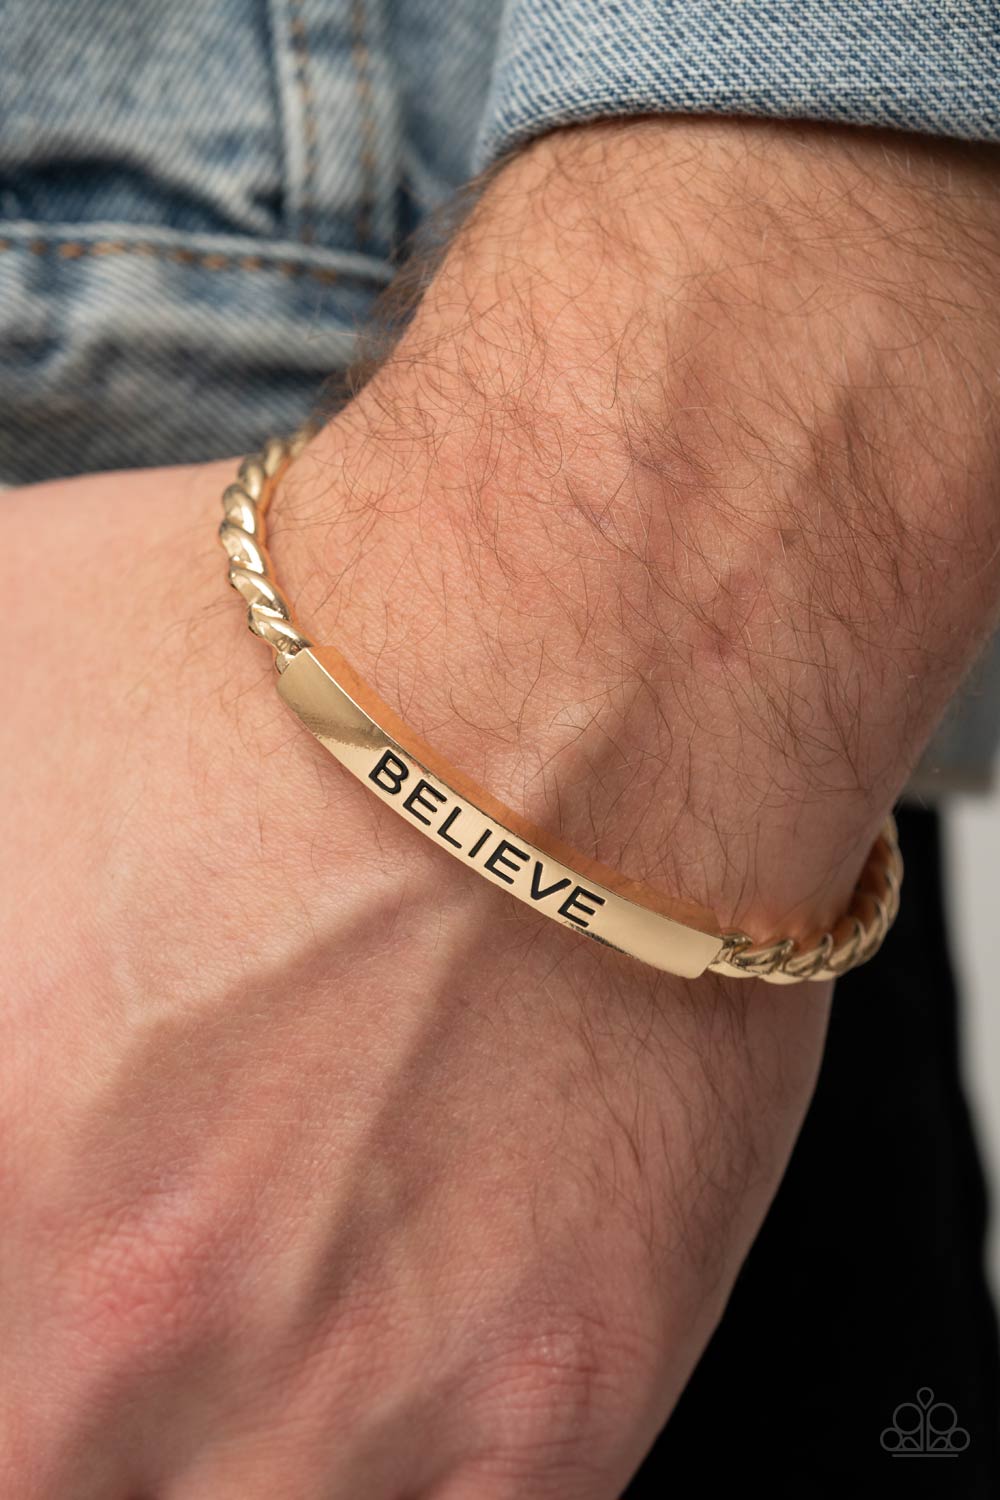 Keep Calm and Believe Bracelet - Gold